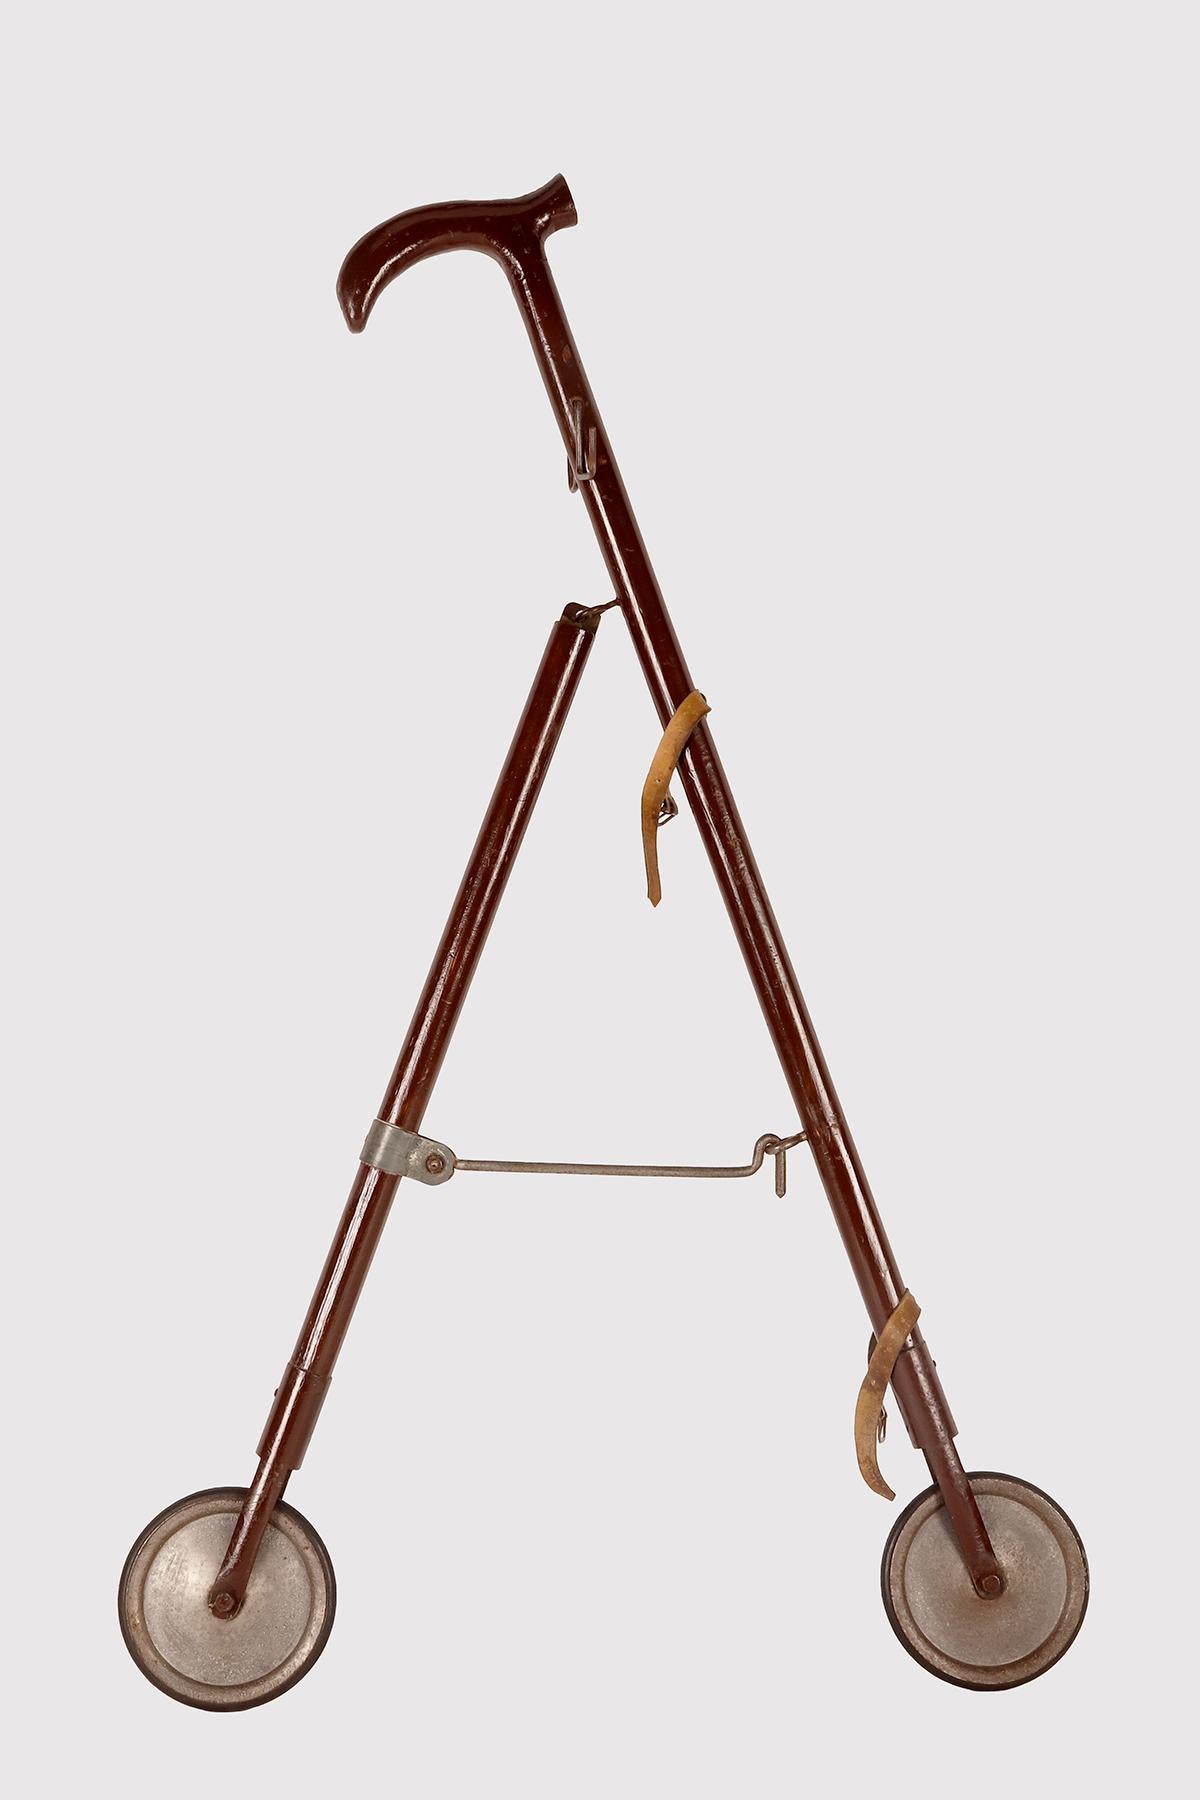 Gadget-System cane: cane with bag holder function. Curious stick used to carry shopping bags, made with two upside-down V-shaped wooden shafts, ending with two small iron and rubber wheels. Under the handle there are two hooks (one on the right and